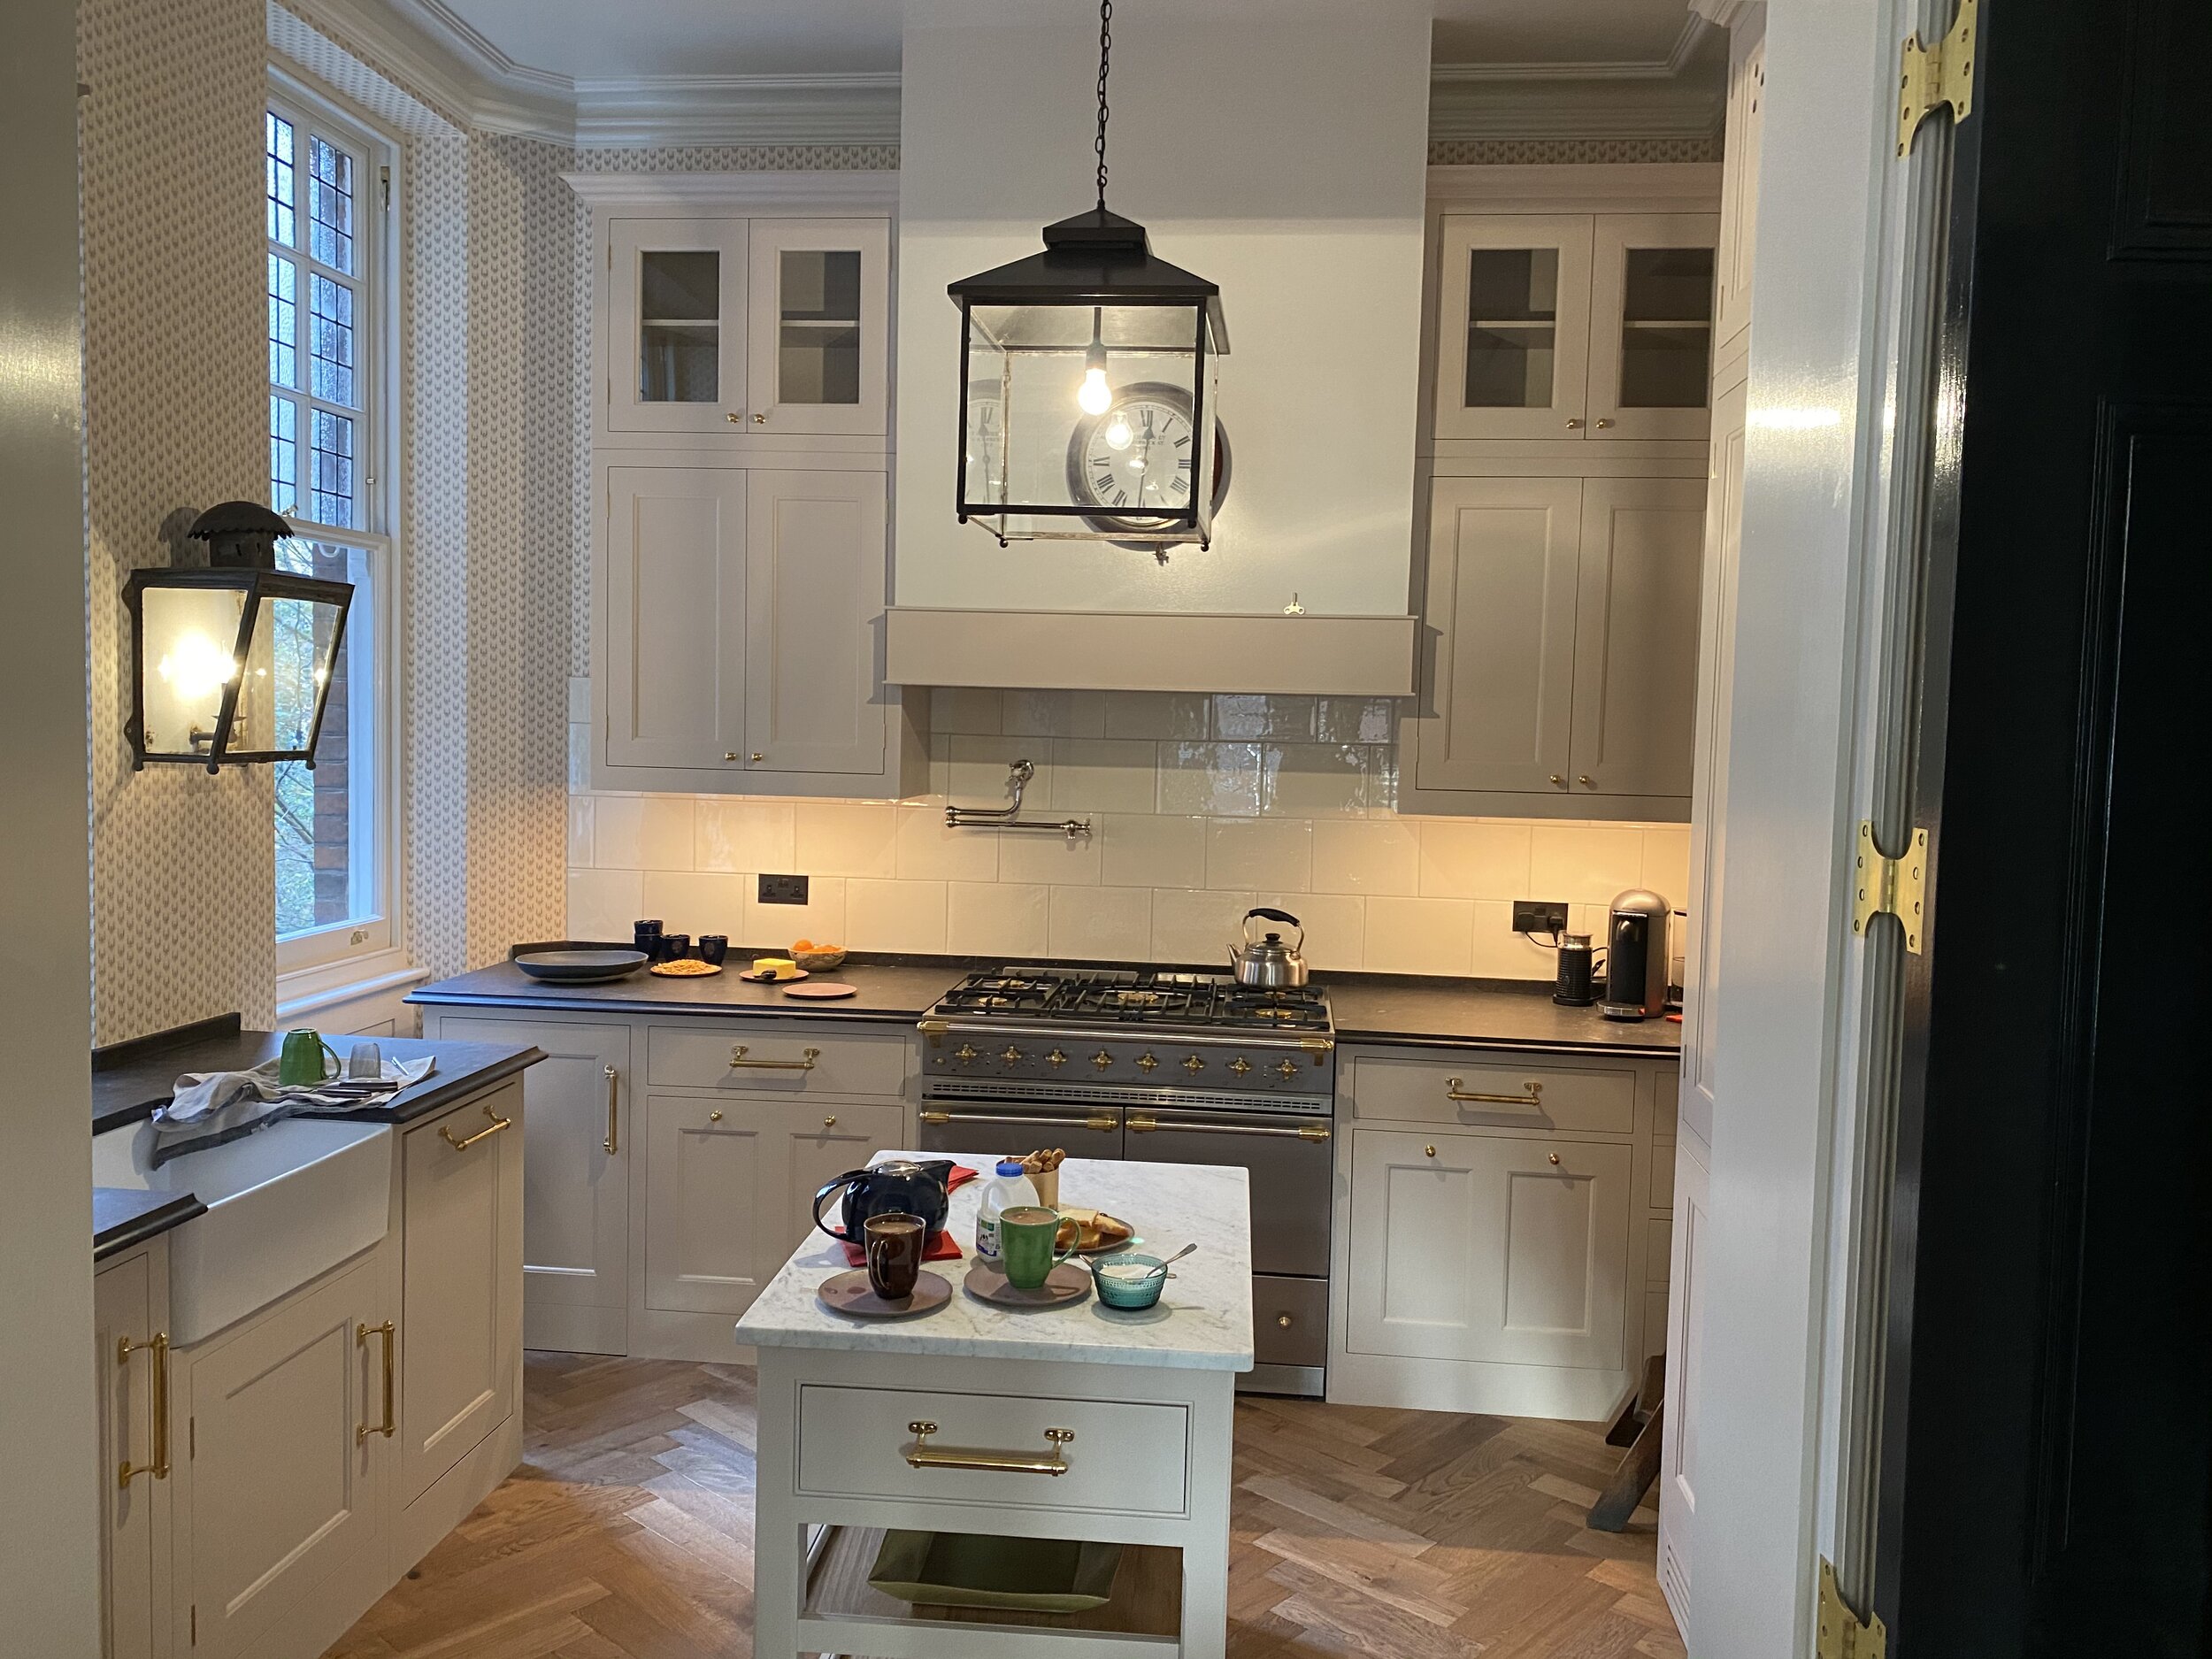 Kitchen with central island, hardwood floors and low hanging large pendant in the middle